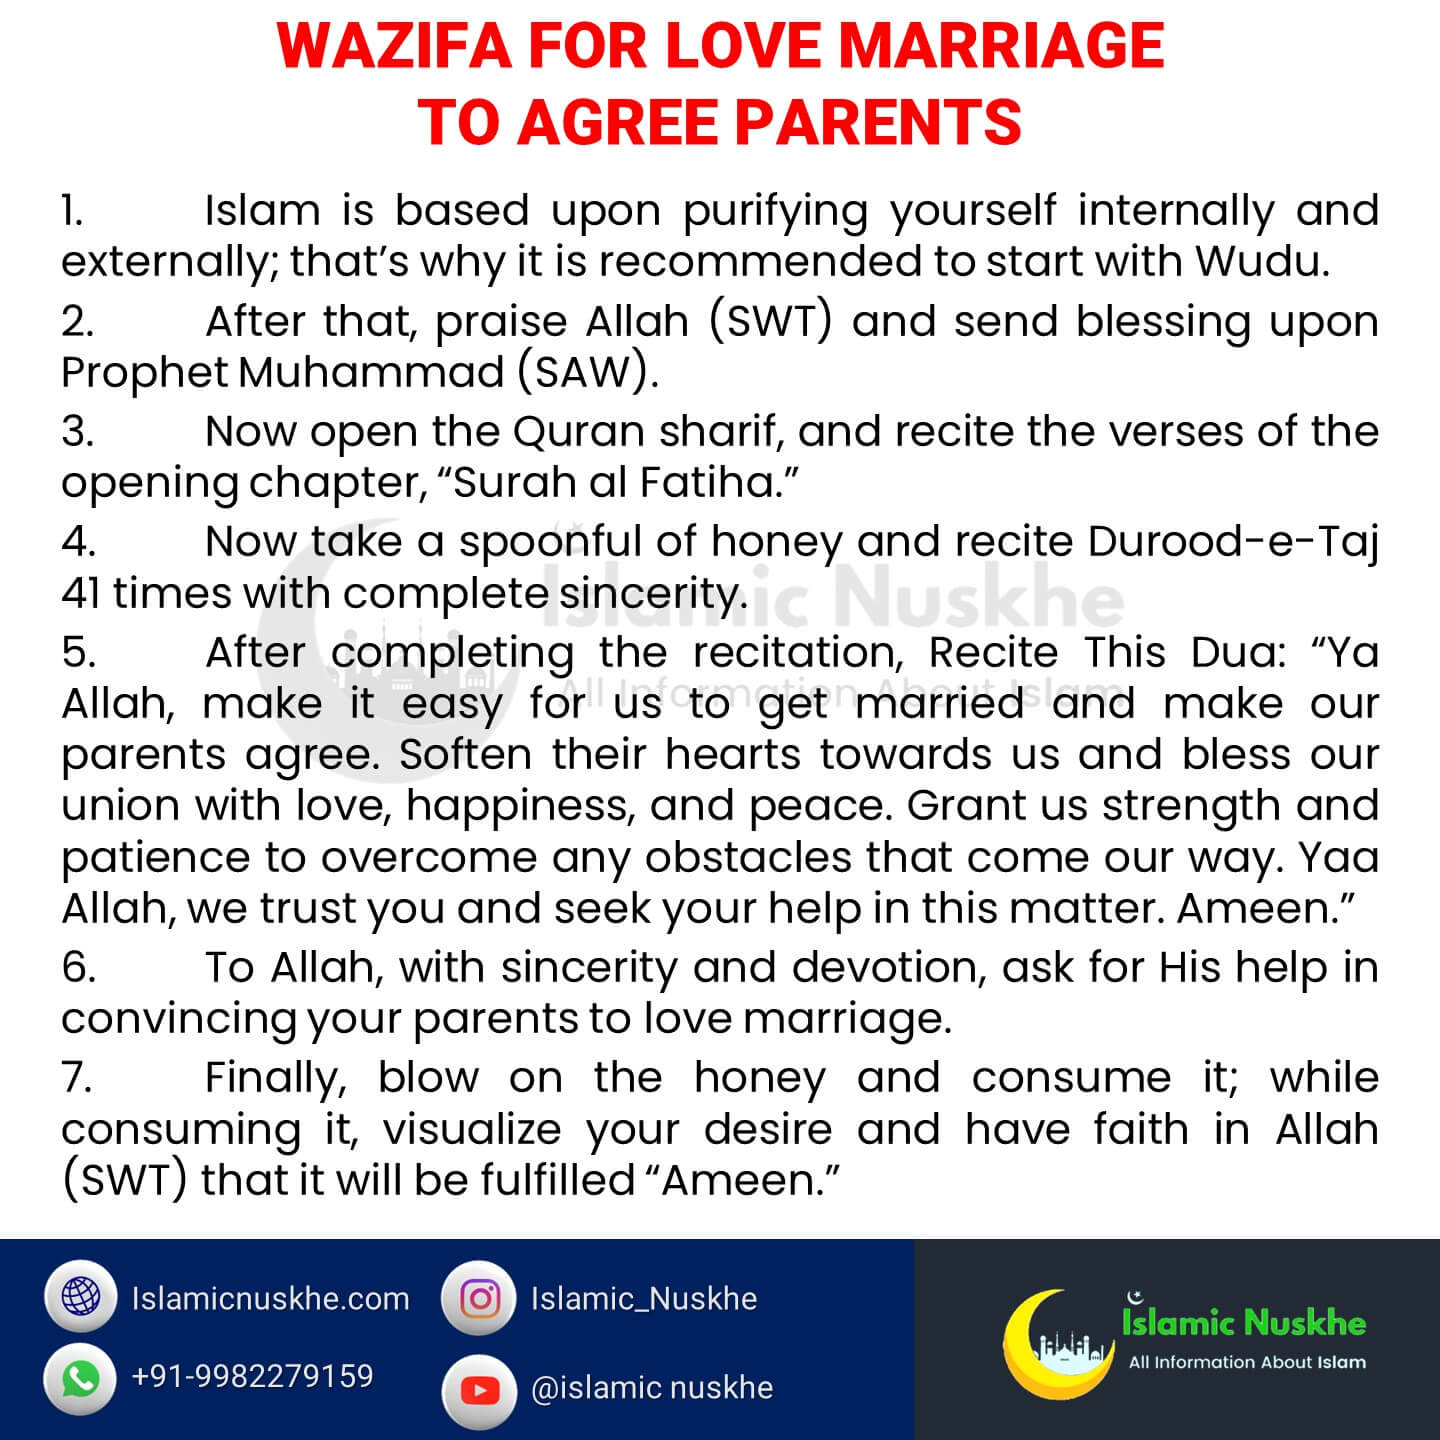 Wazifa-For-Love-Marriage-To-Agree-Parents